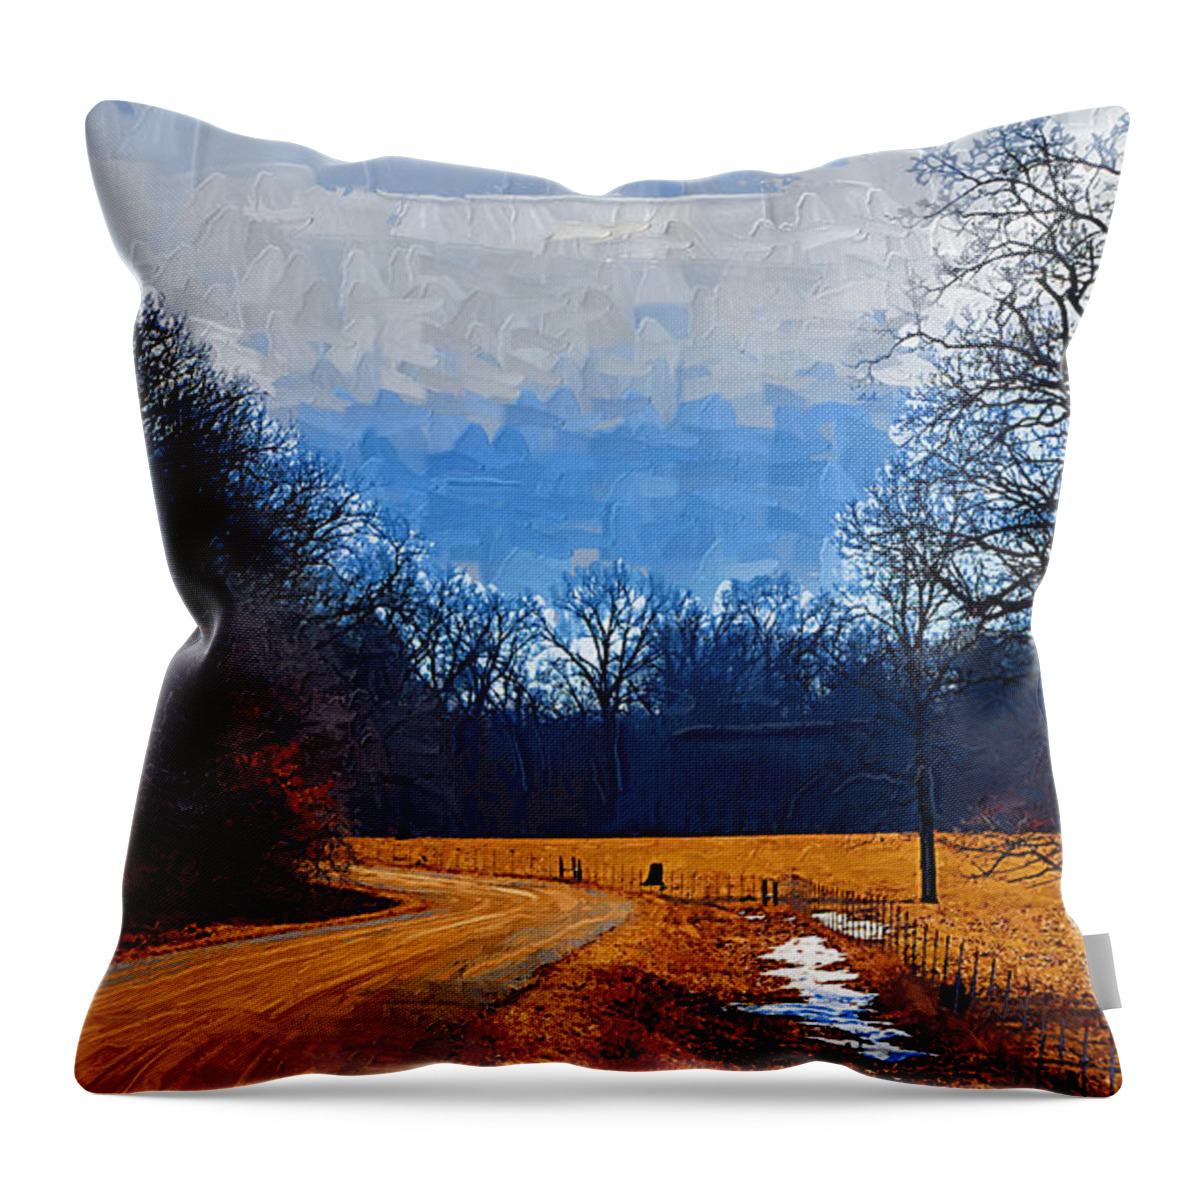 Country Throw Pillow featuring the painting Dirt Road by Kirt Tisdale